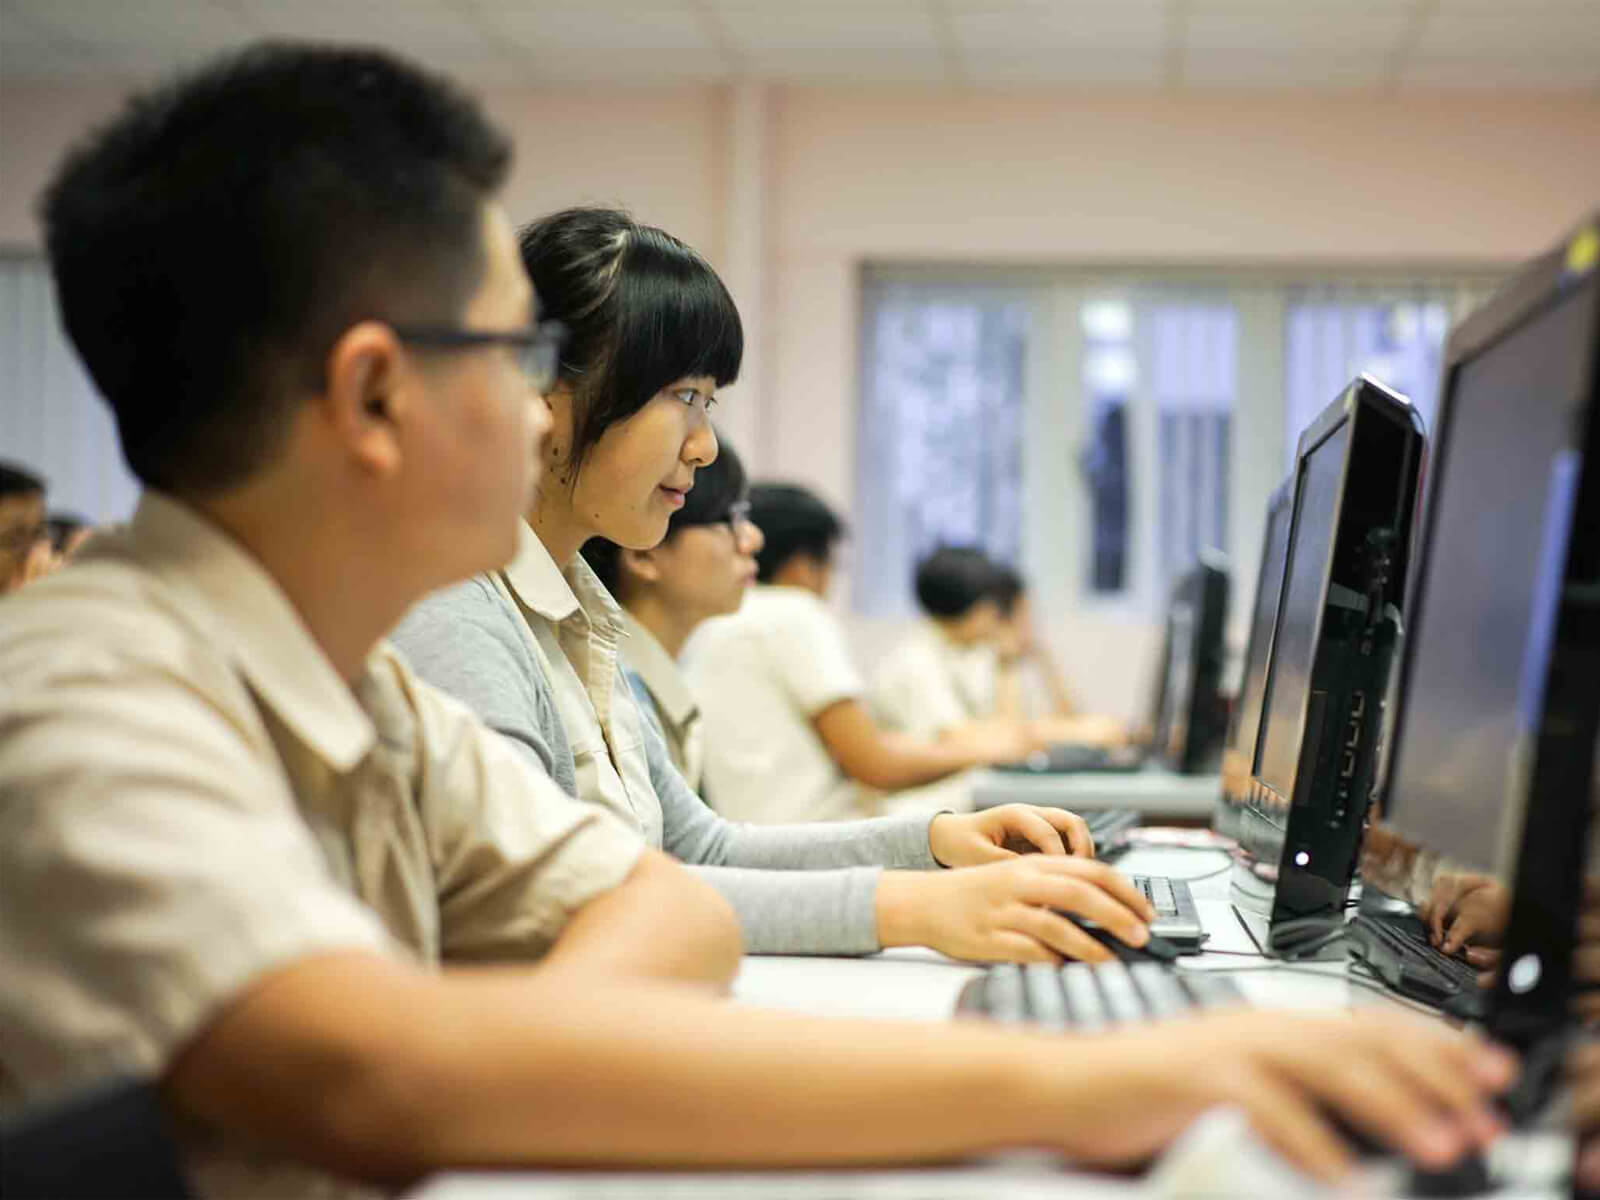 Students sit at a desk looking at a computer monitor while using a mouse and keyboard